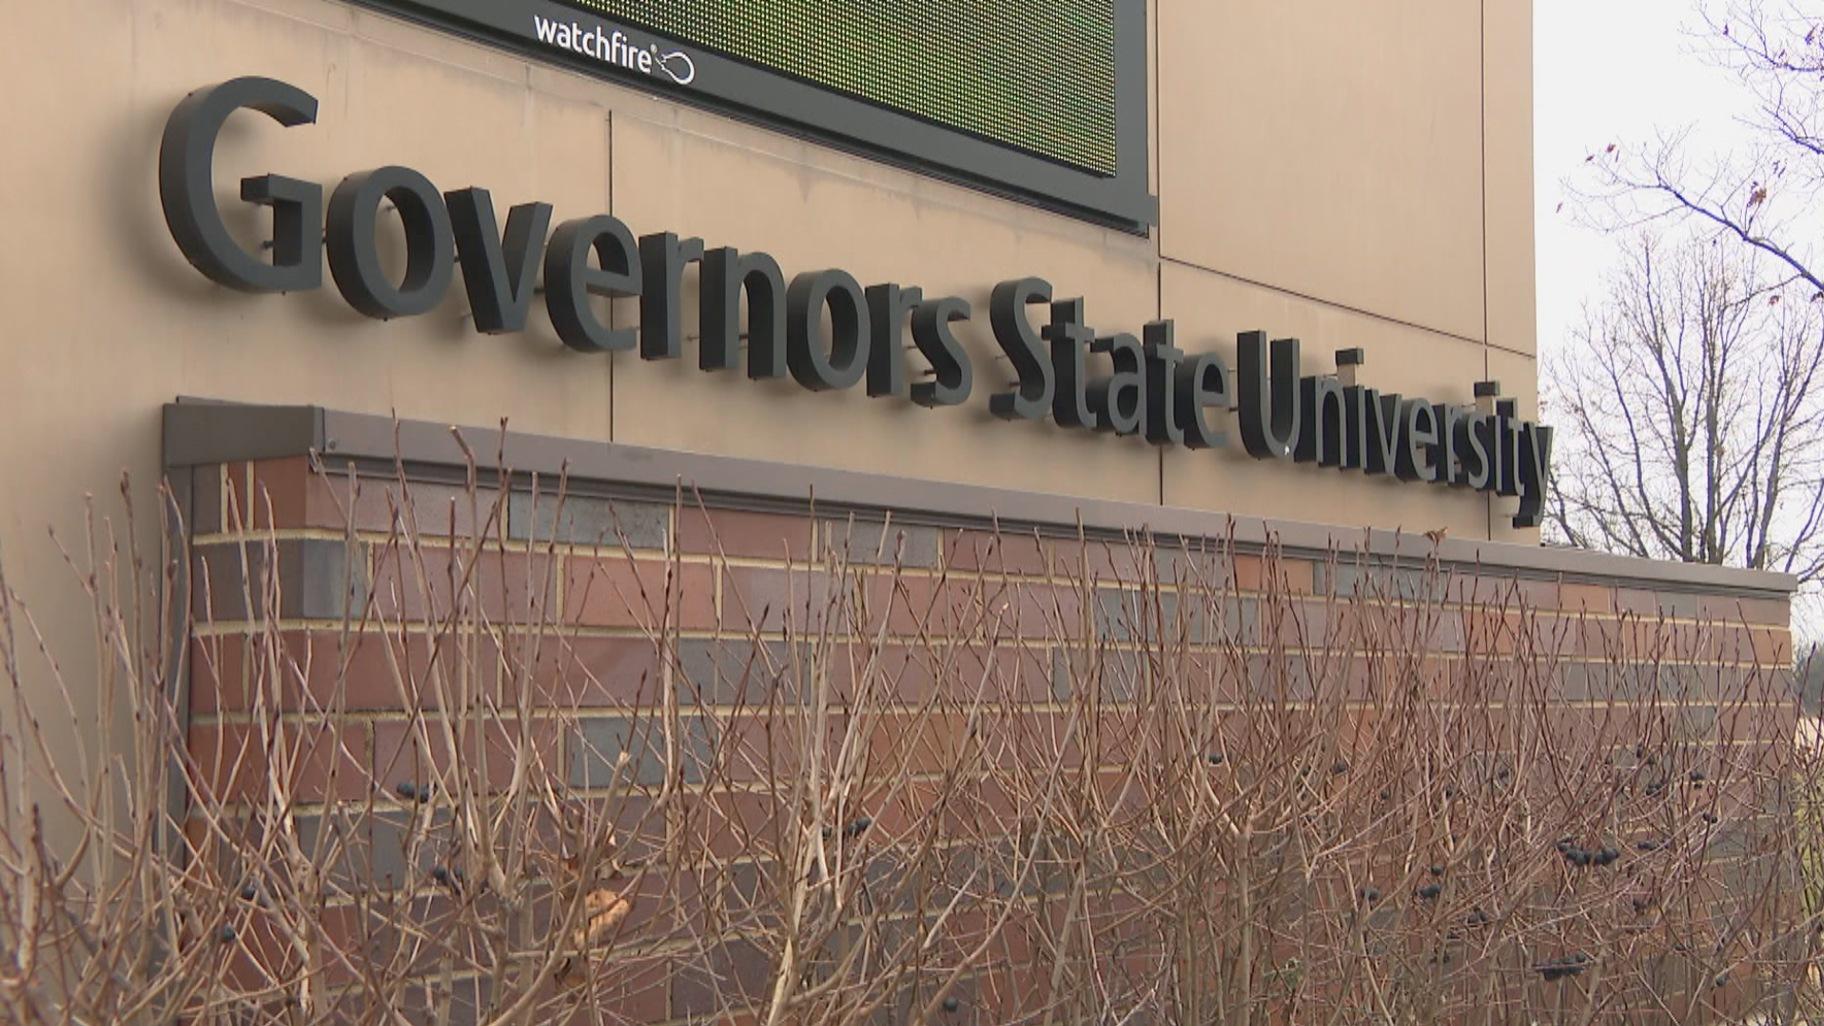 Faculty and staff went on strike at Governors State University on Tuesday. File photo. (WTTW News)